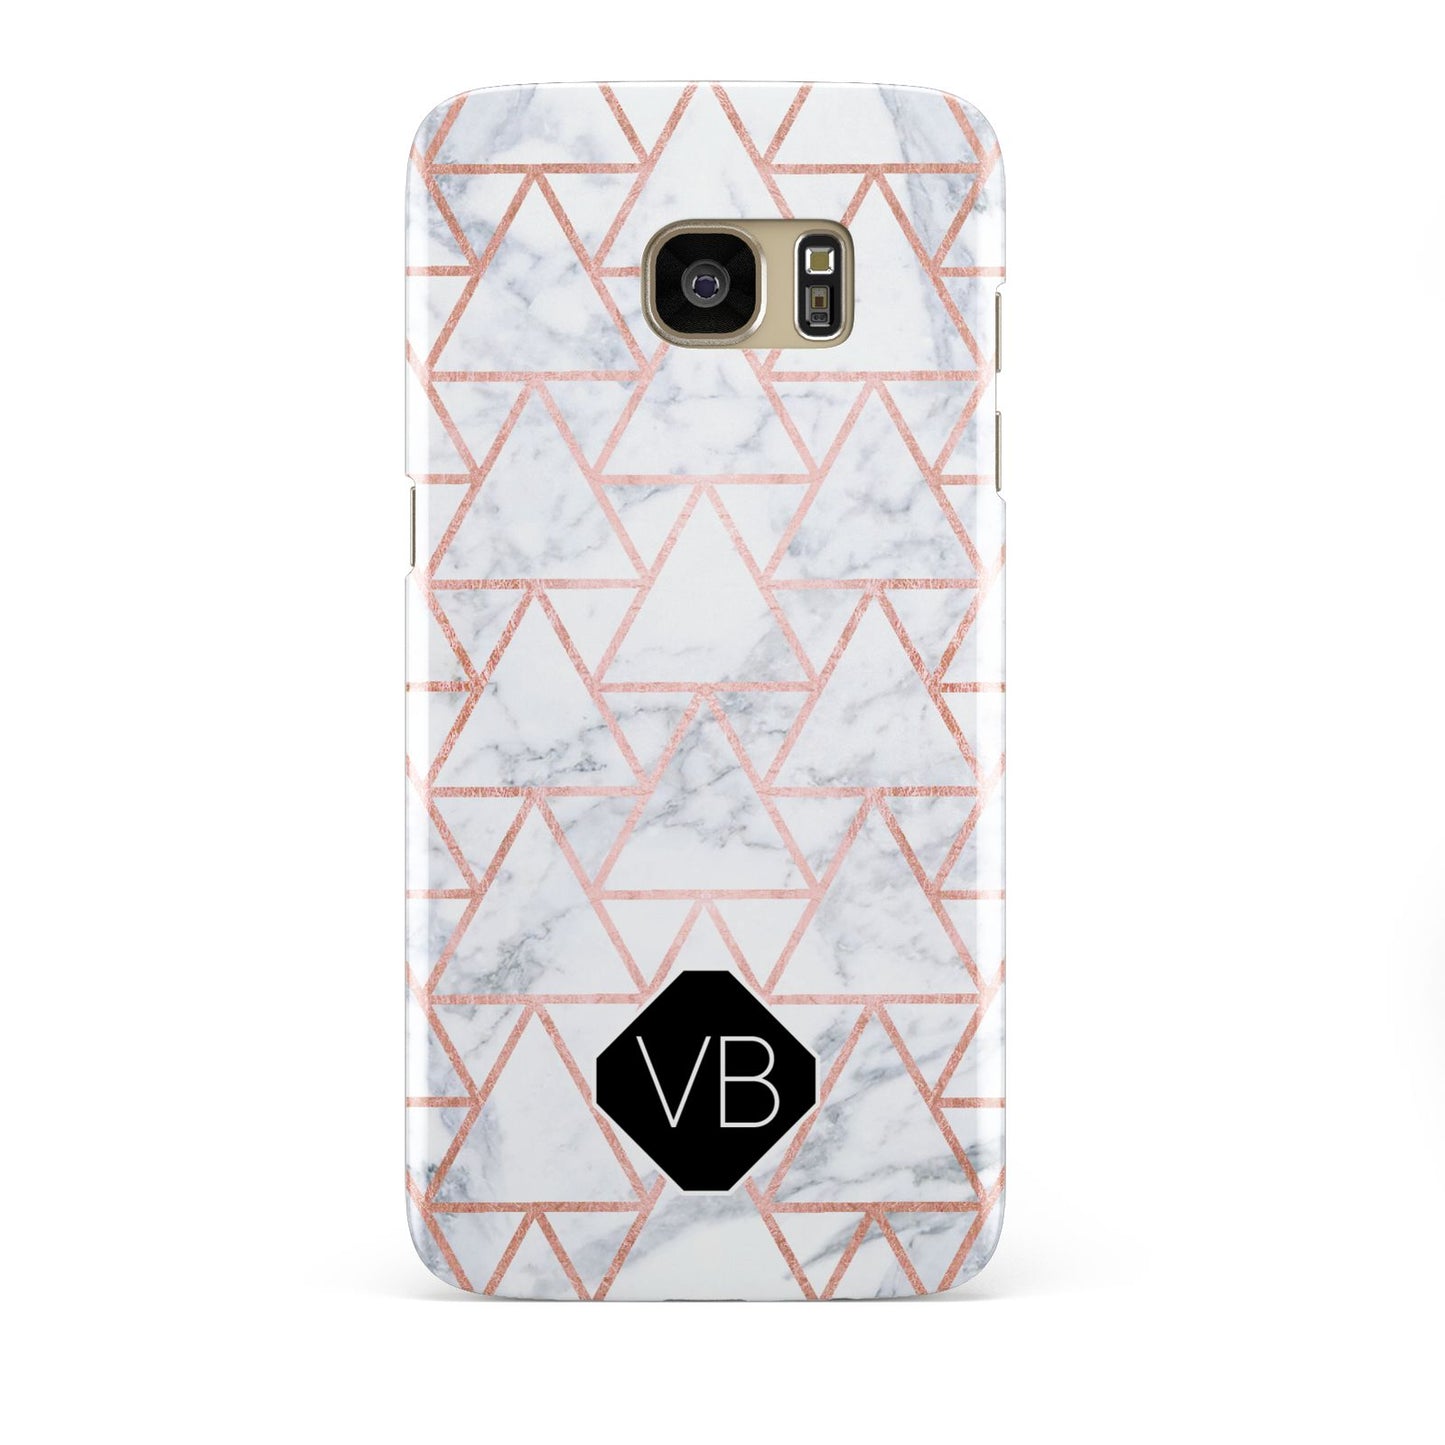 Personalised Rose Gold Grey Marble Hexagon Samsung Galaxy S7 Edge Case